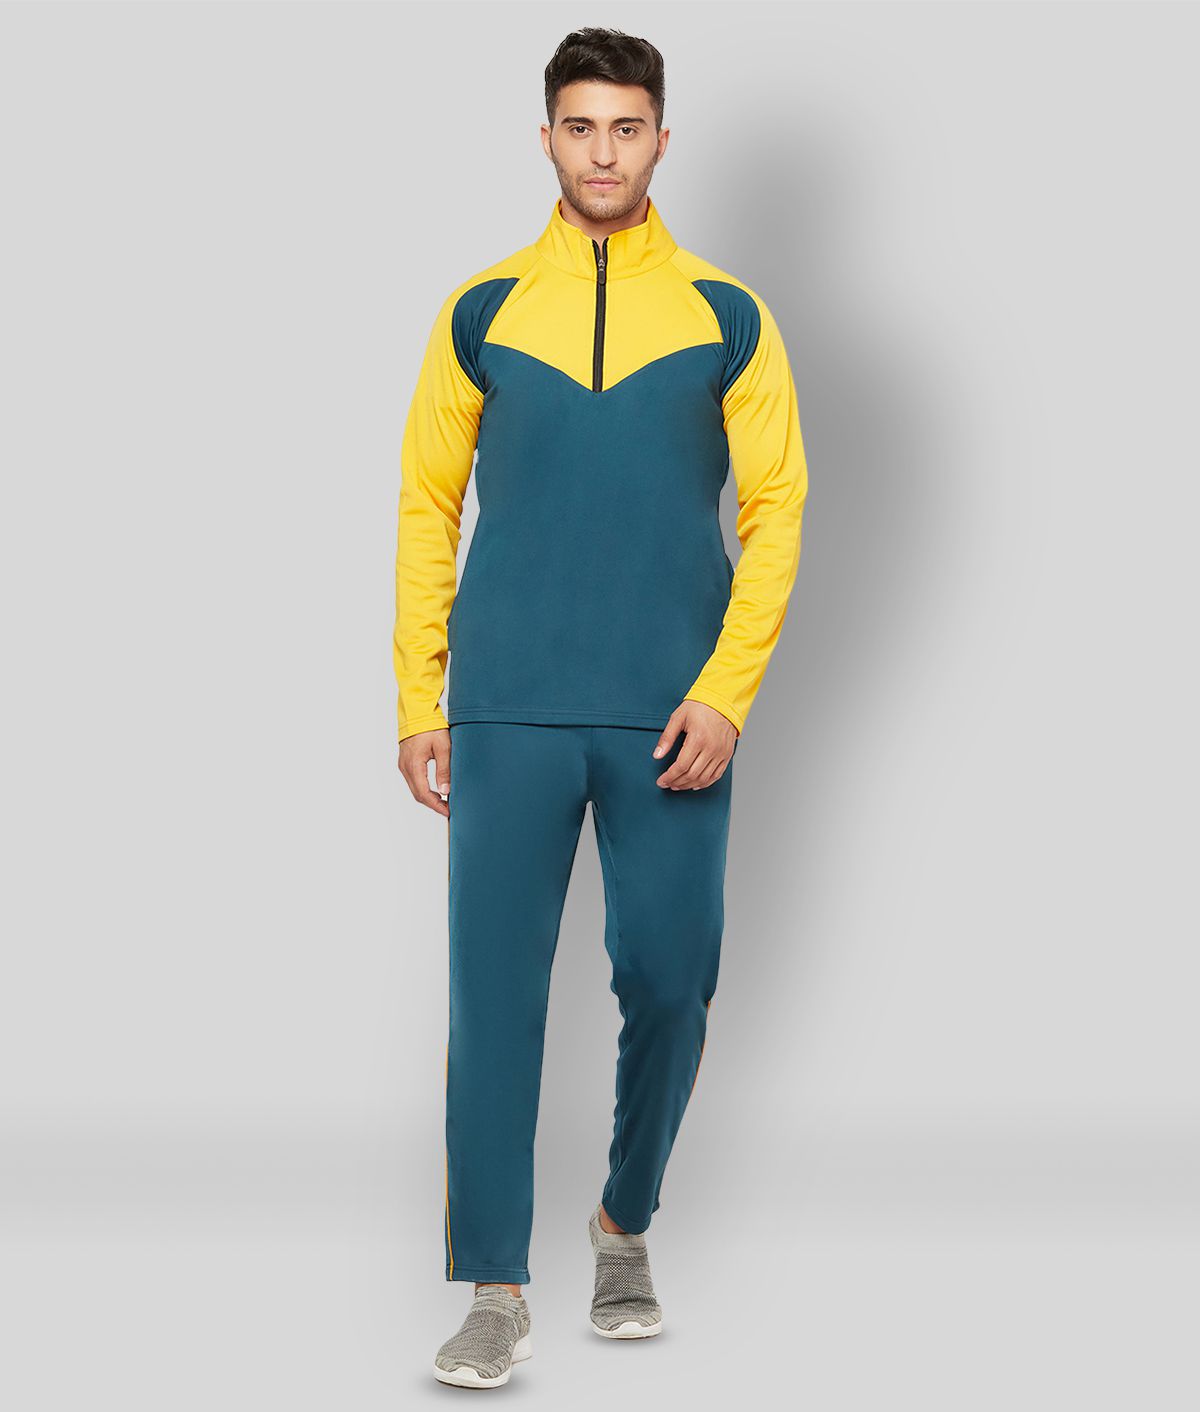     			Glito - Teal Polyester Regular Fit Colorblock Men's Sports Tracksuit ( Pack of 1 )